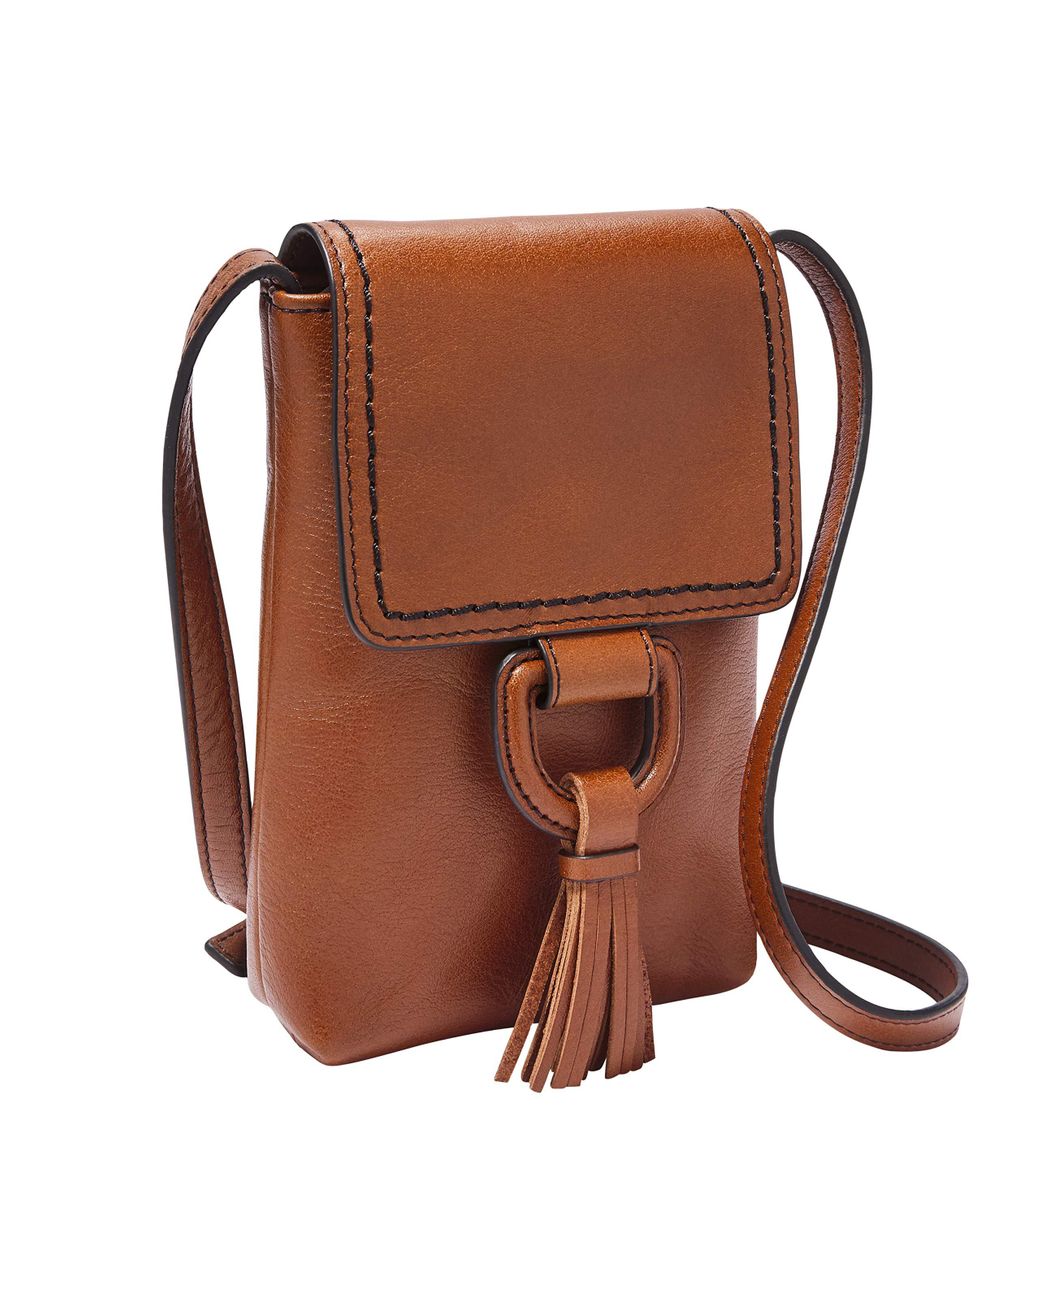 Fossil Bobbie Leather Phone Wallet Crossbody in Brown - Lyst